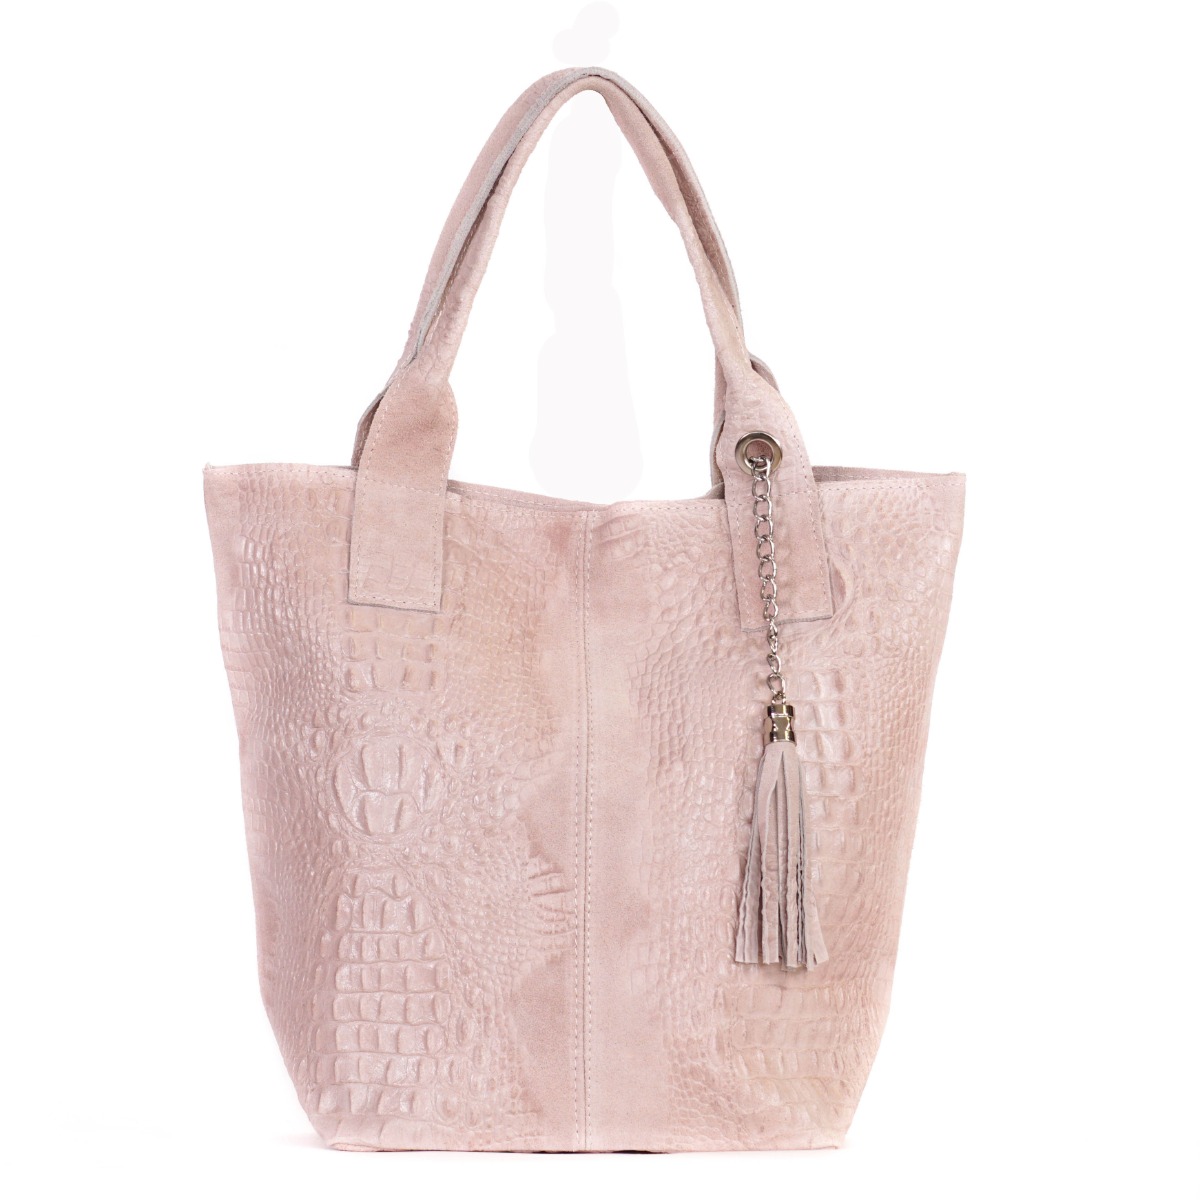 Pink suede leather women's tote bag